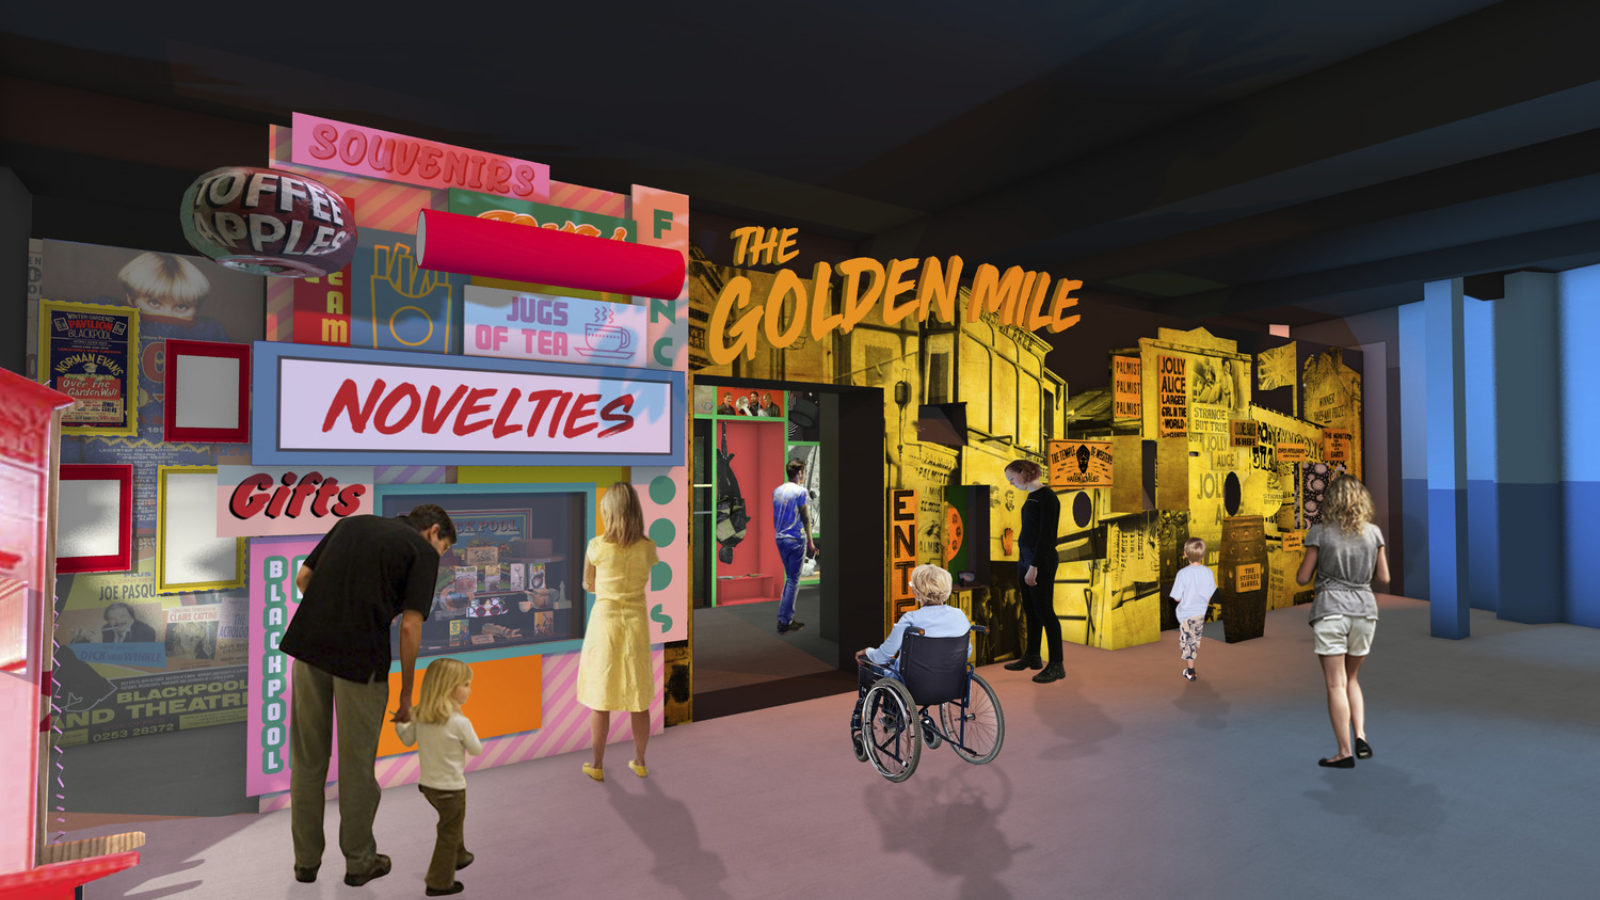 A visual of the Golden Mile Gallery with bright signs and a display case of collections